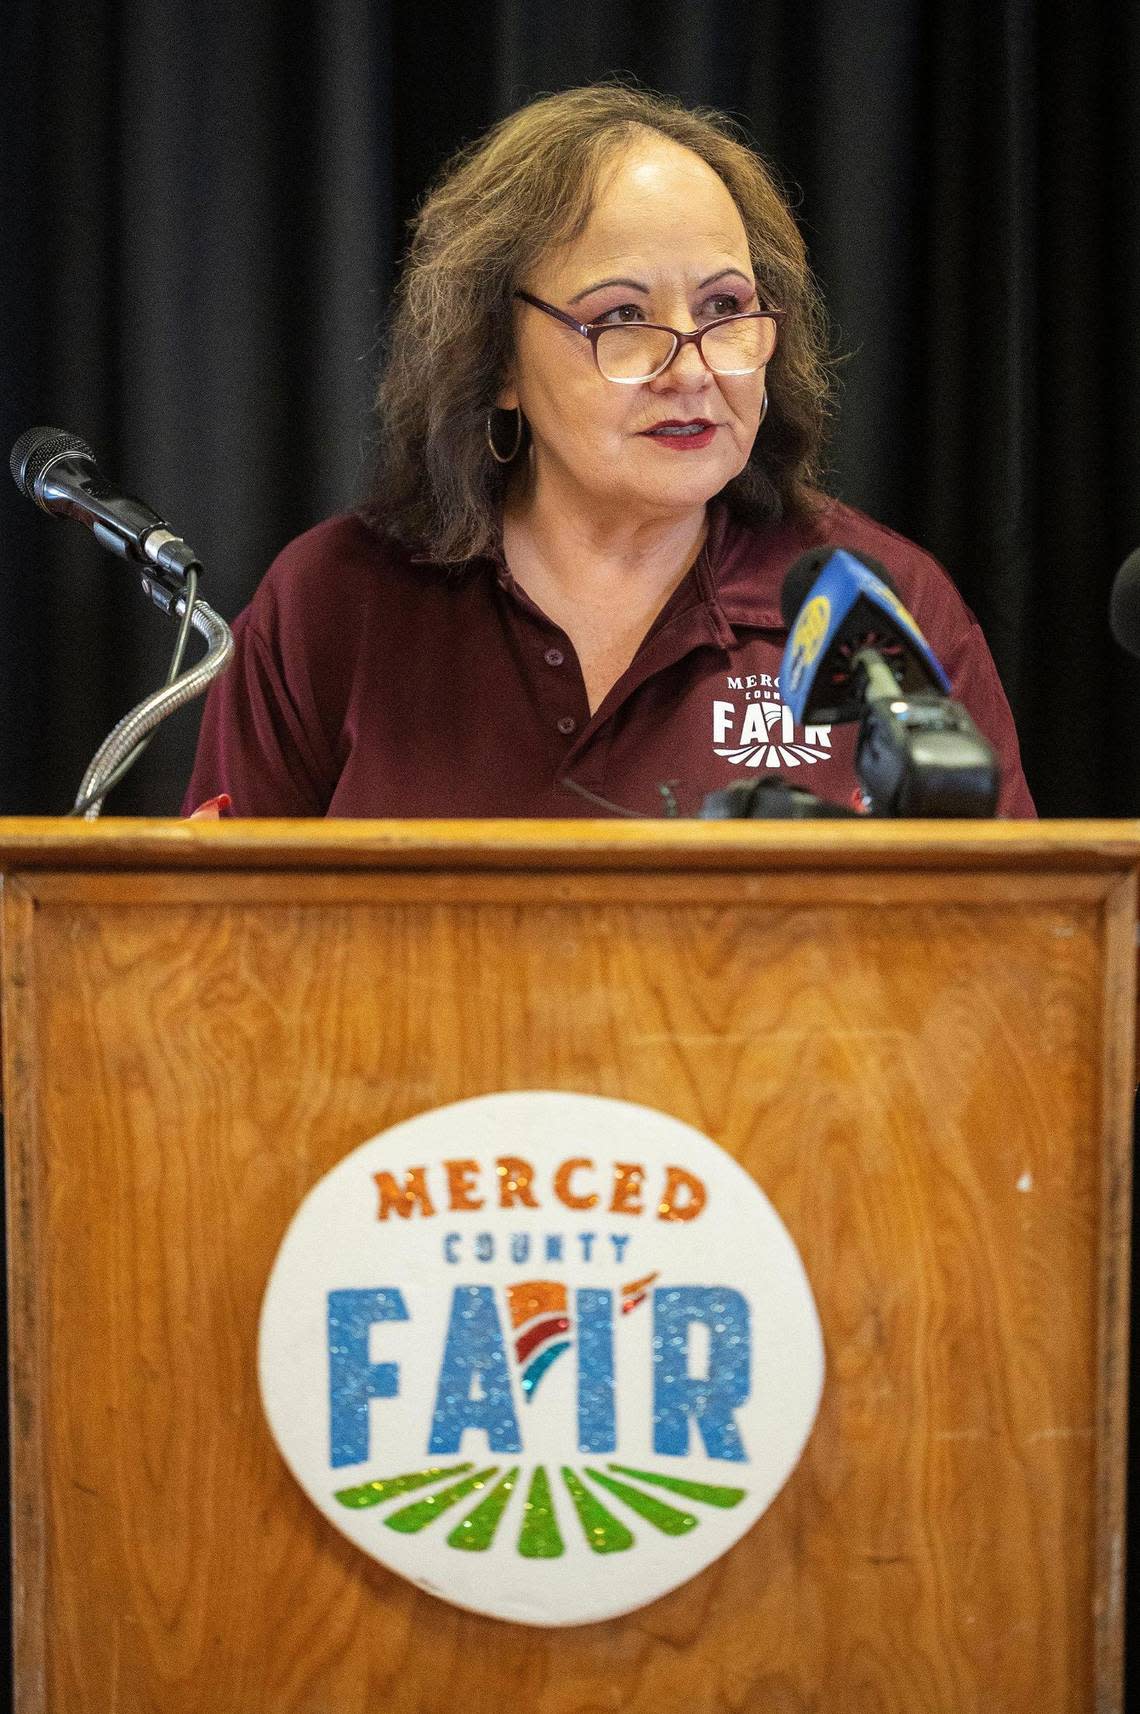 Merced County Fair President Vicky Banaga speaks during a news conference announcing $5 million in state funding awarded to the Merced County Fair at the Merced County Fairgrounds in Merced, Calif., on Wednesday, Aug. 9, 2023. According to Banaga, the funding will be used to upgrade facility kitchens, facility HVAC and a new roof for one of the buildings. Andrew Kuhn/akuhn@mercedsun-star.com